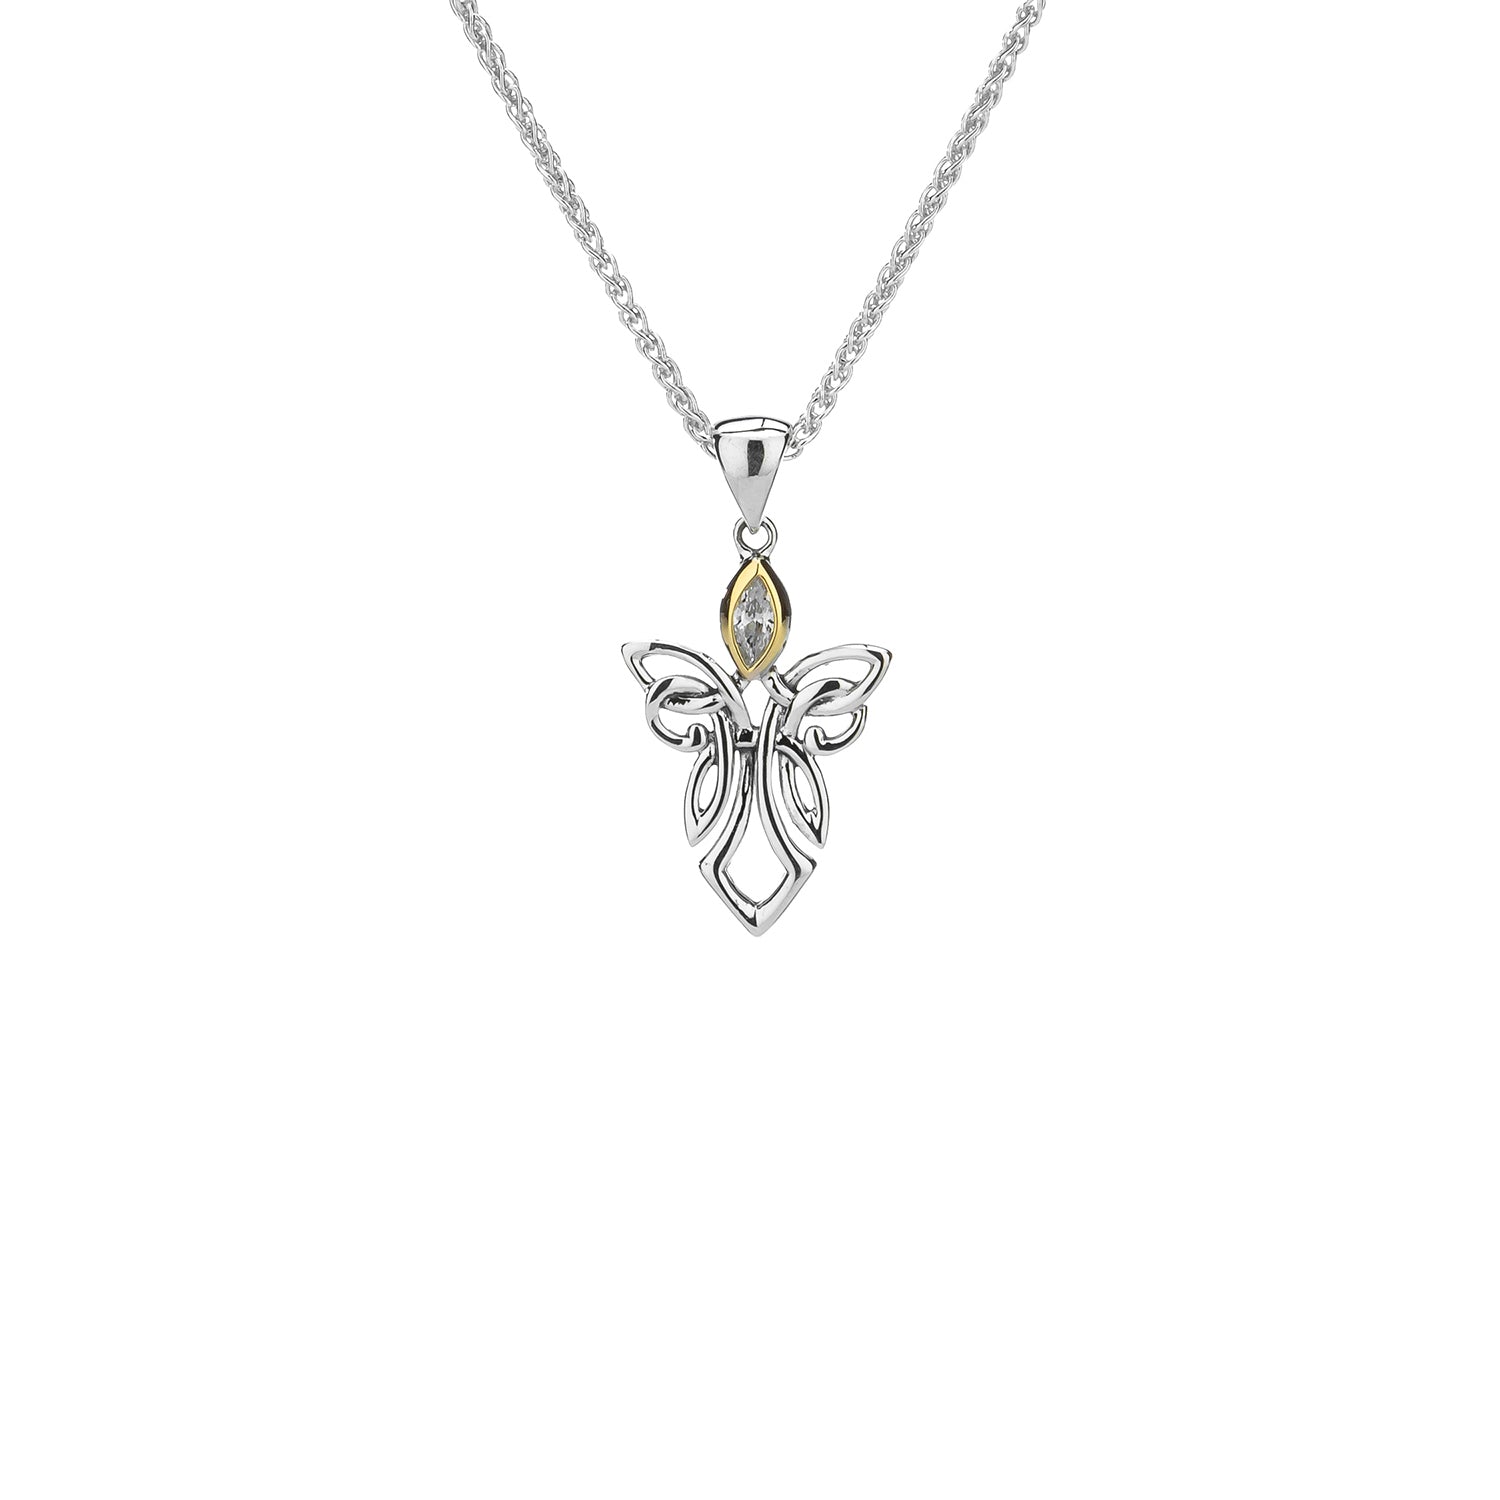 Pendant 10k CZ Small Guardian Angel Pendant from welch and company jewelers near syracuse ny 